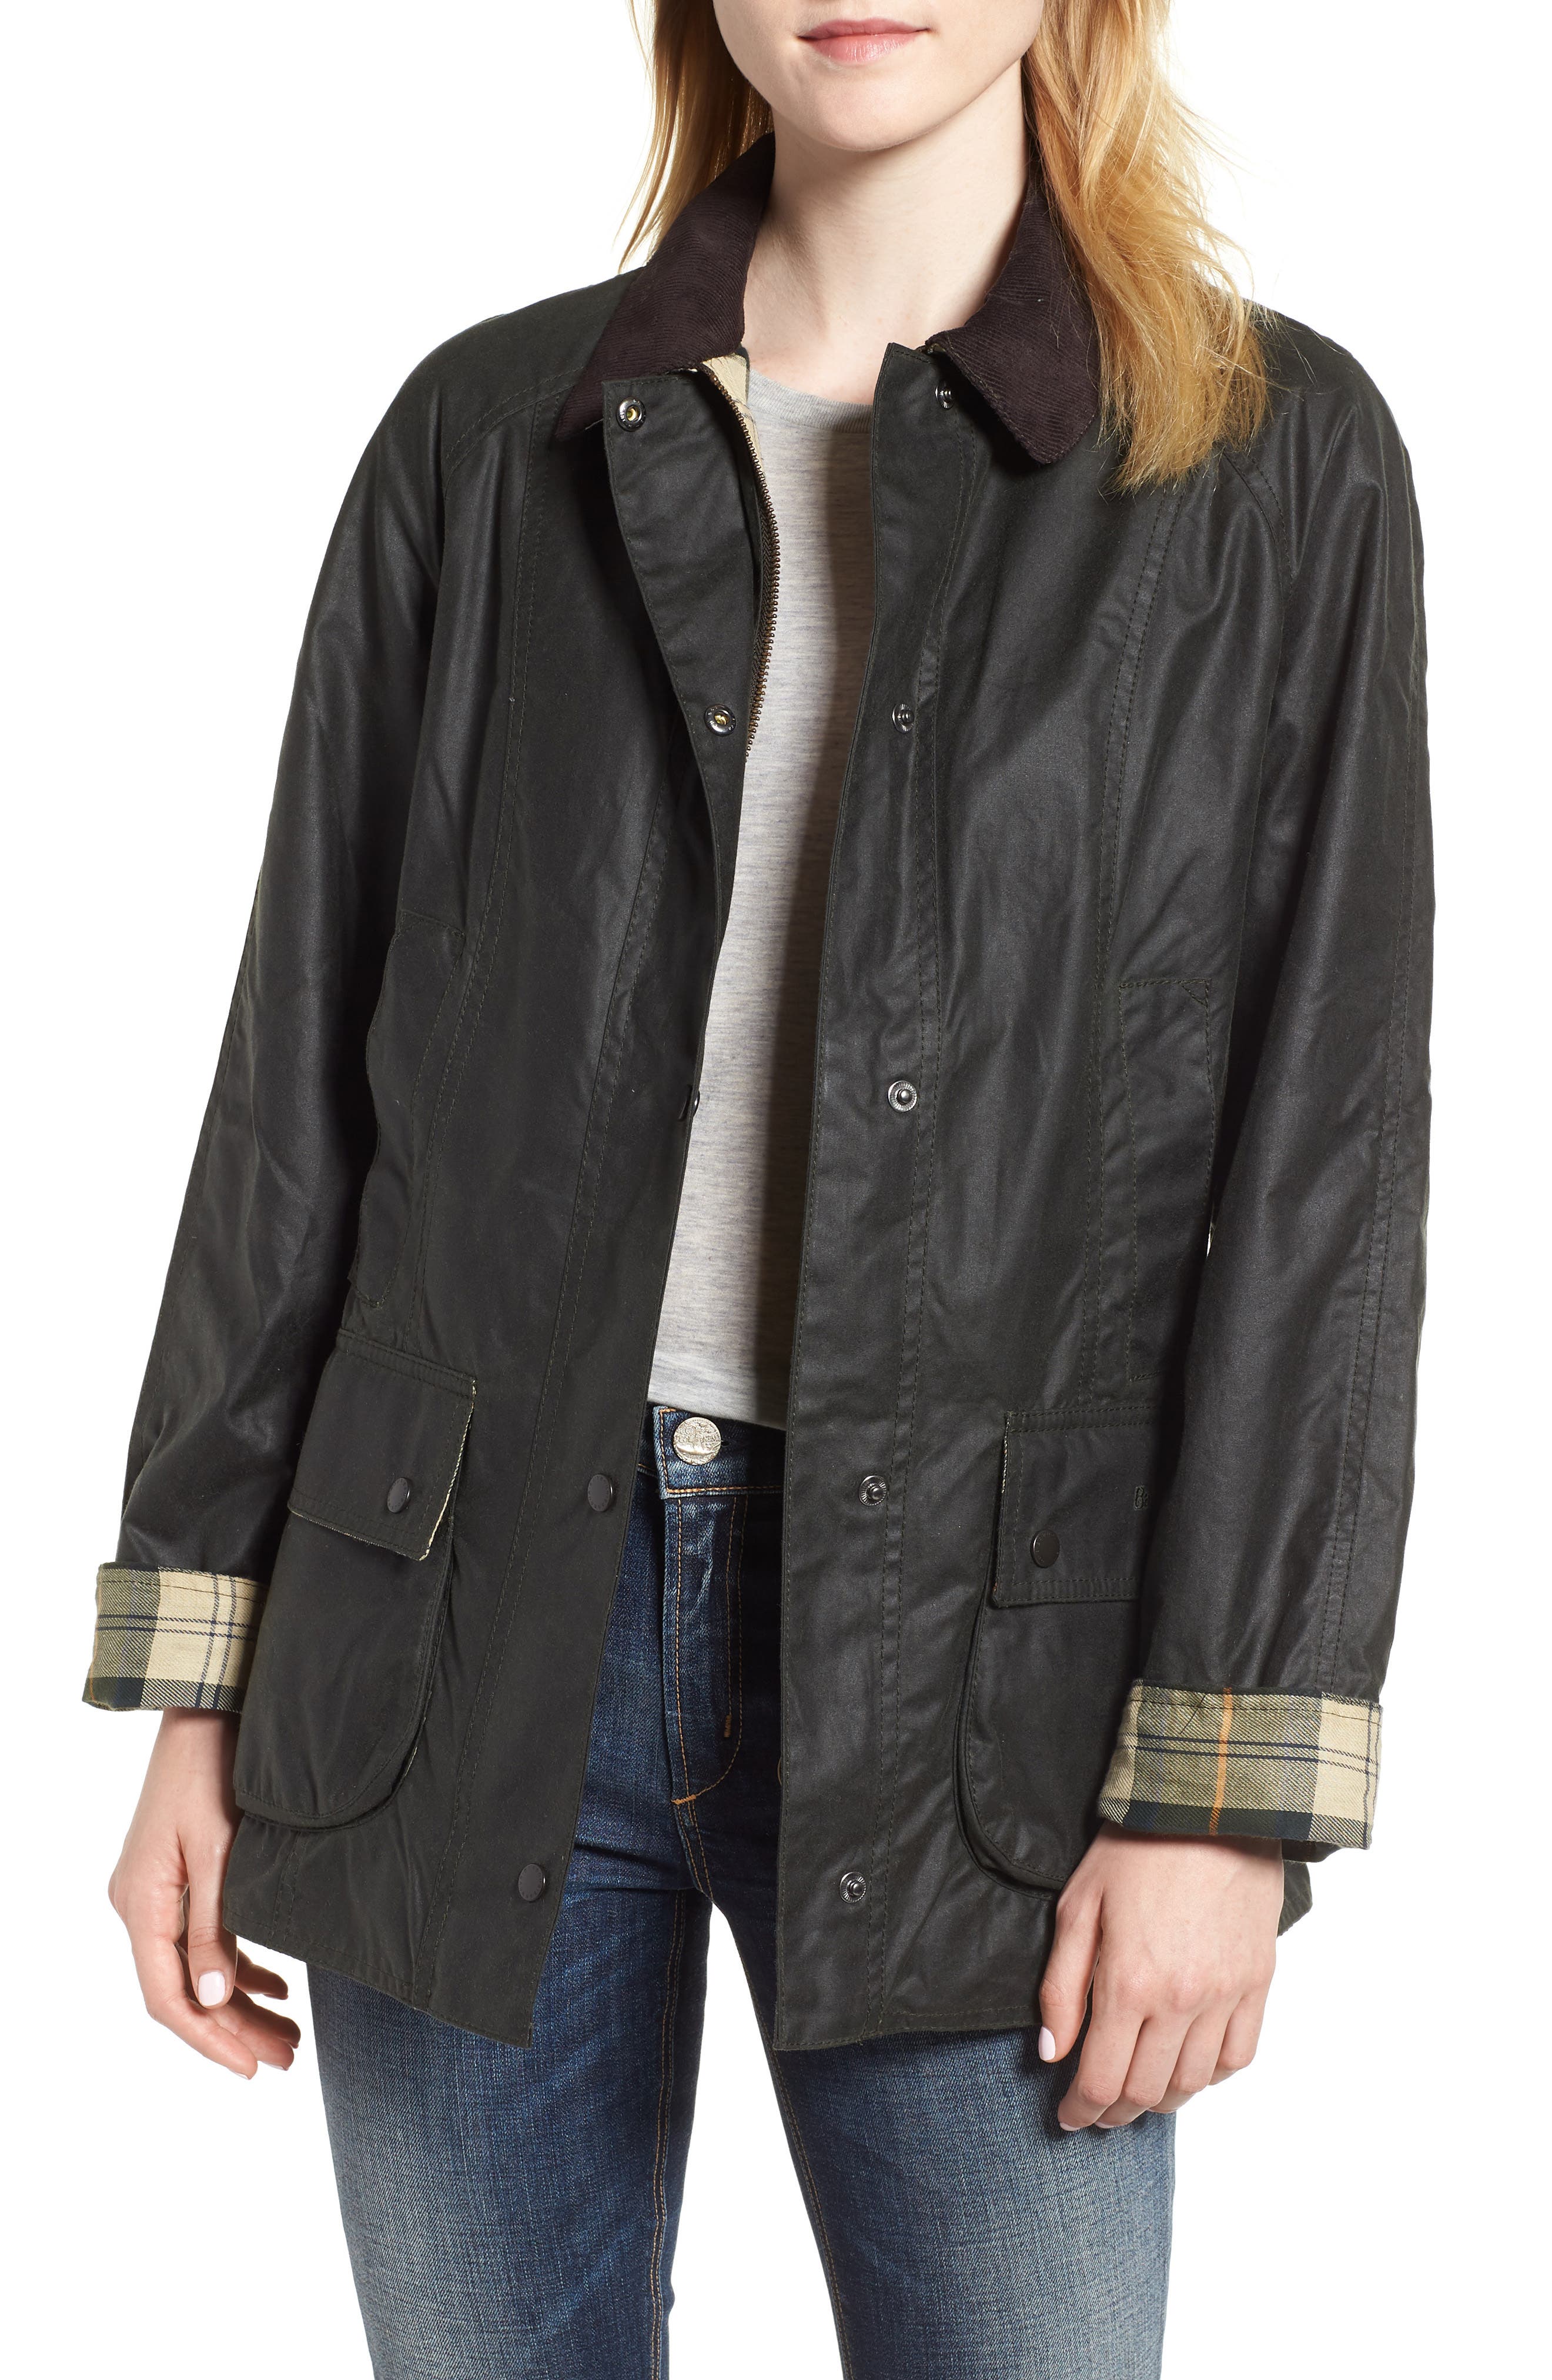 nordstrom barbour beadnell